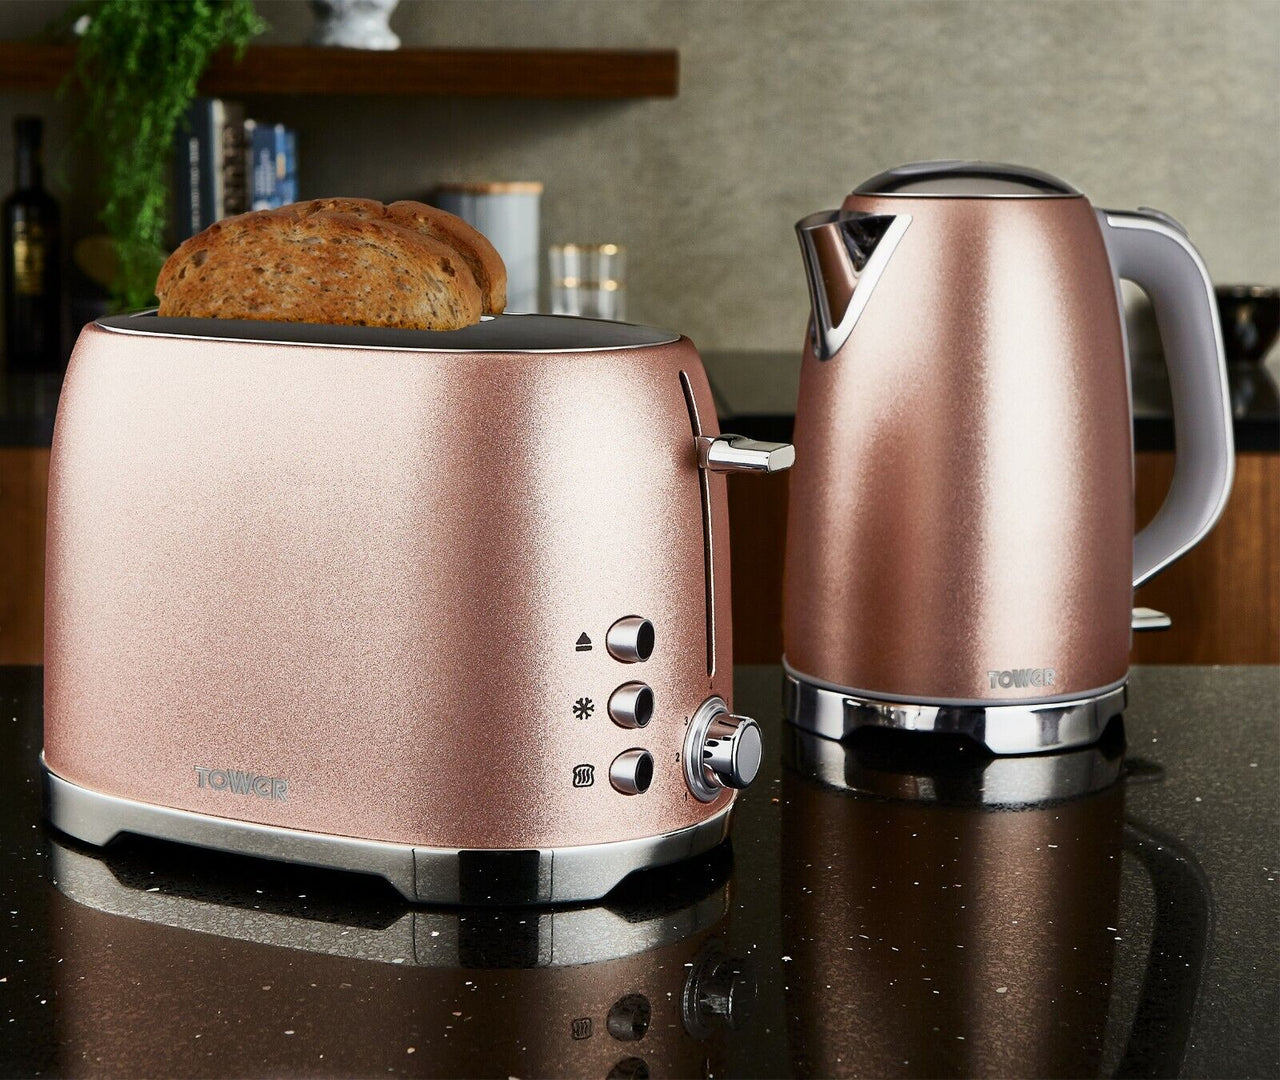 Tower Glitz 1.7L 3KW Kettle & 2 Slice Toaster Set in Blush Pink with Chromed Base